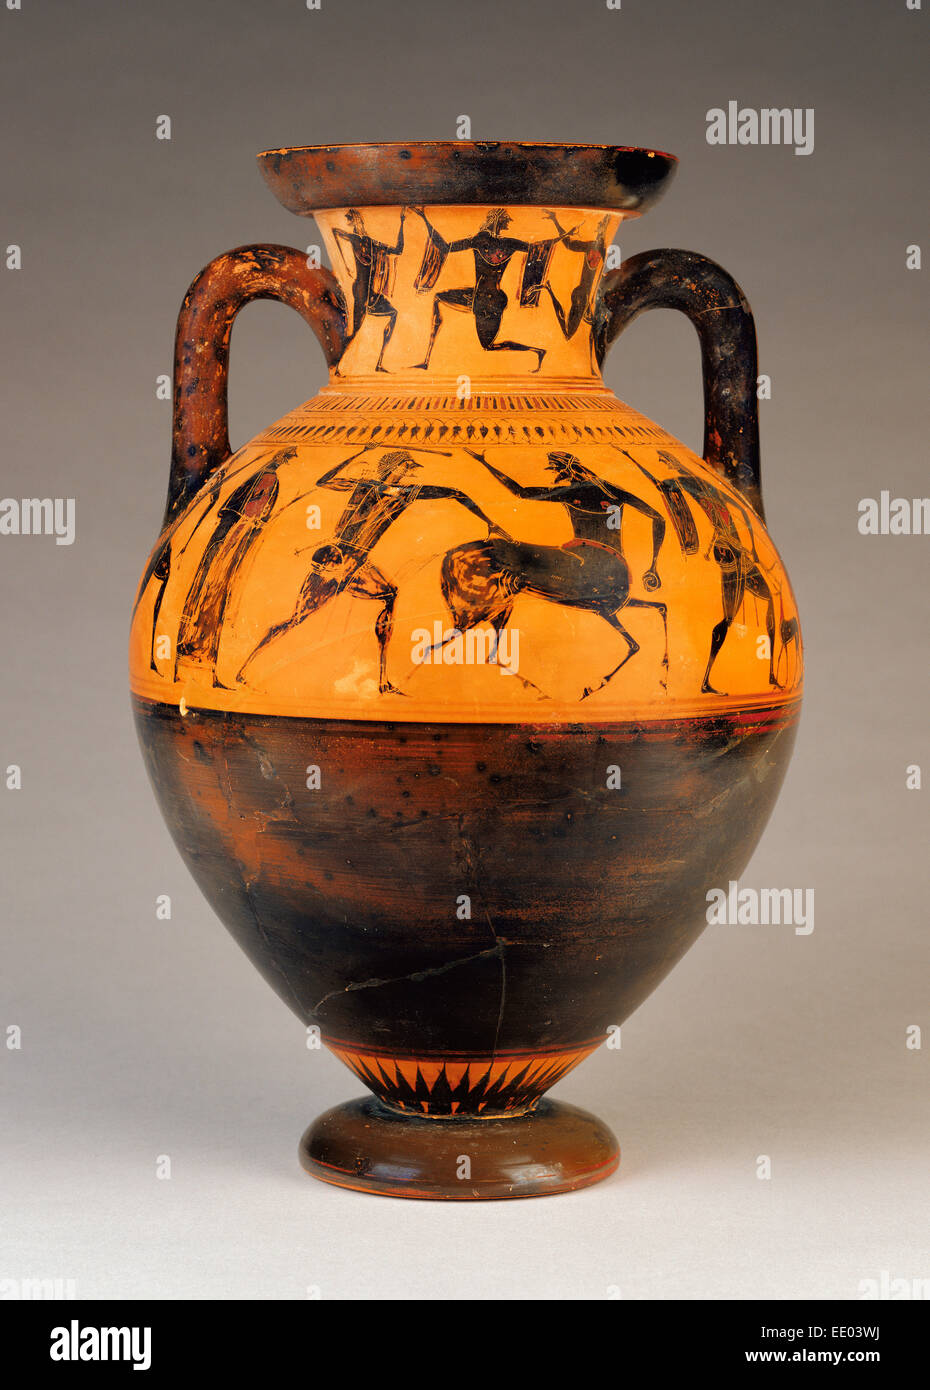 Attic Black-Figure Neck Amphora; Attributed to Affecter, Greek (Attic), about 540 - 520 B.C.; Athens, Greece, Europe Stock Photo